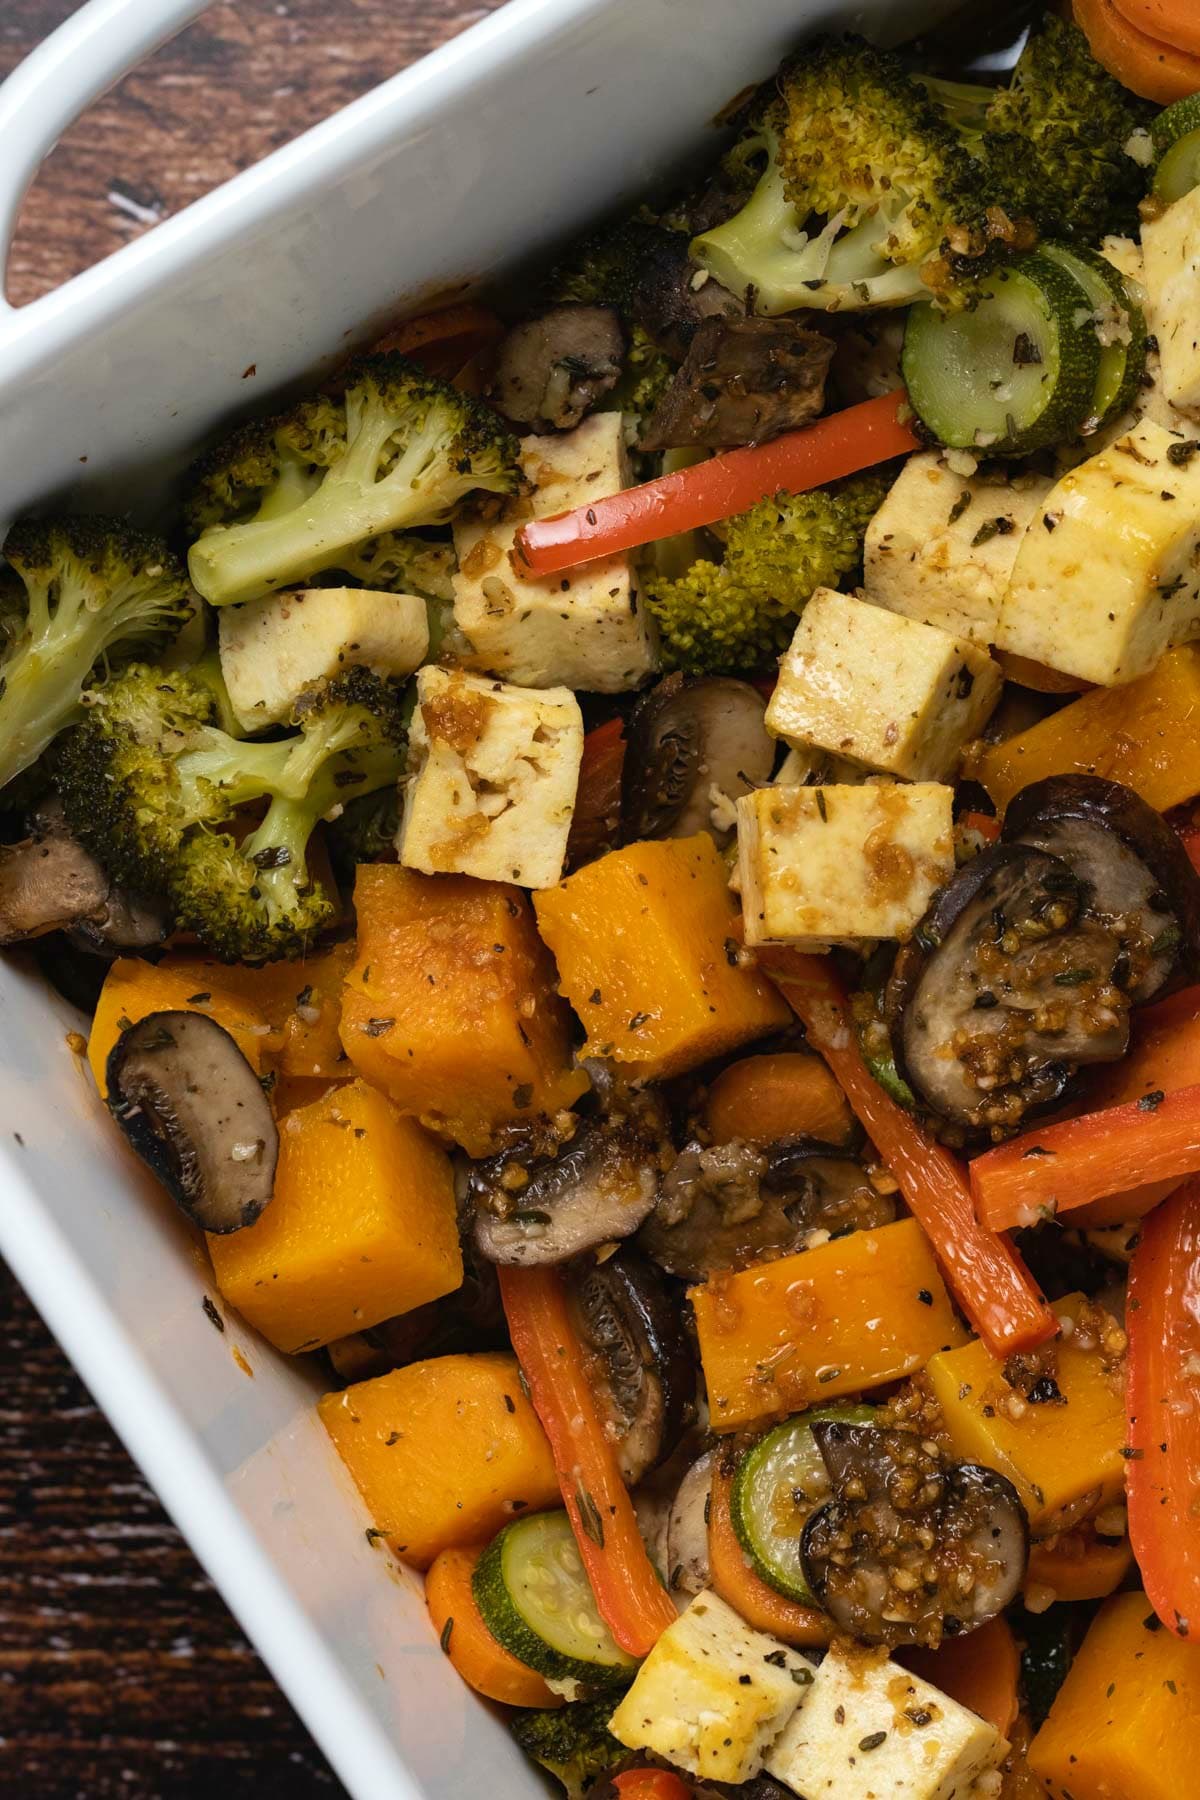 Vegetable casserole in a white baking dish.